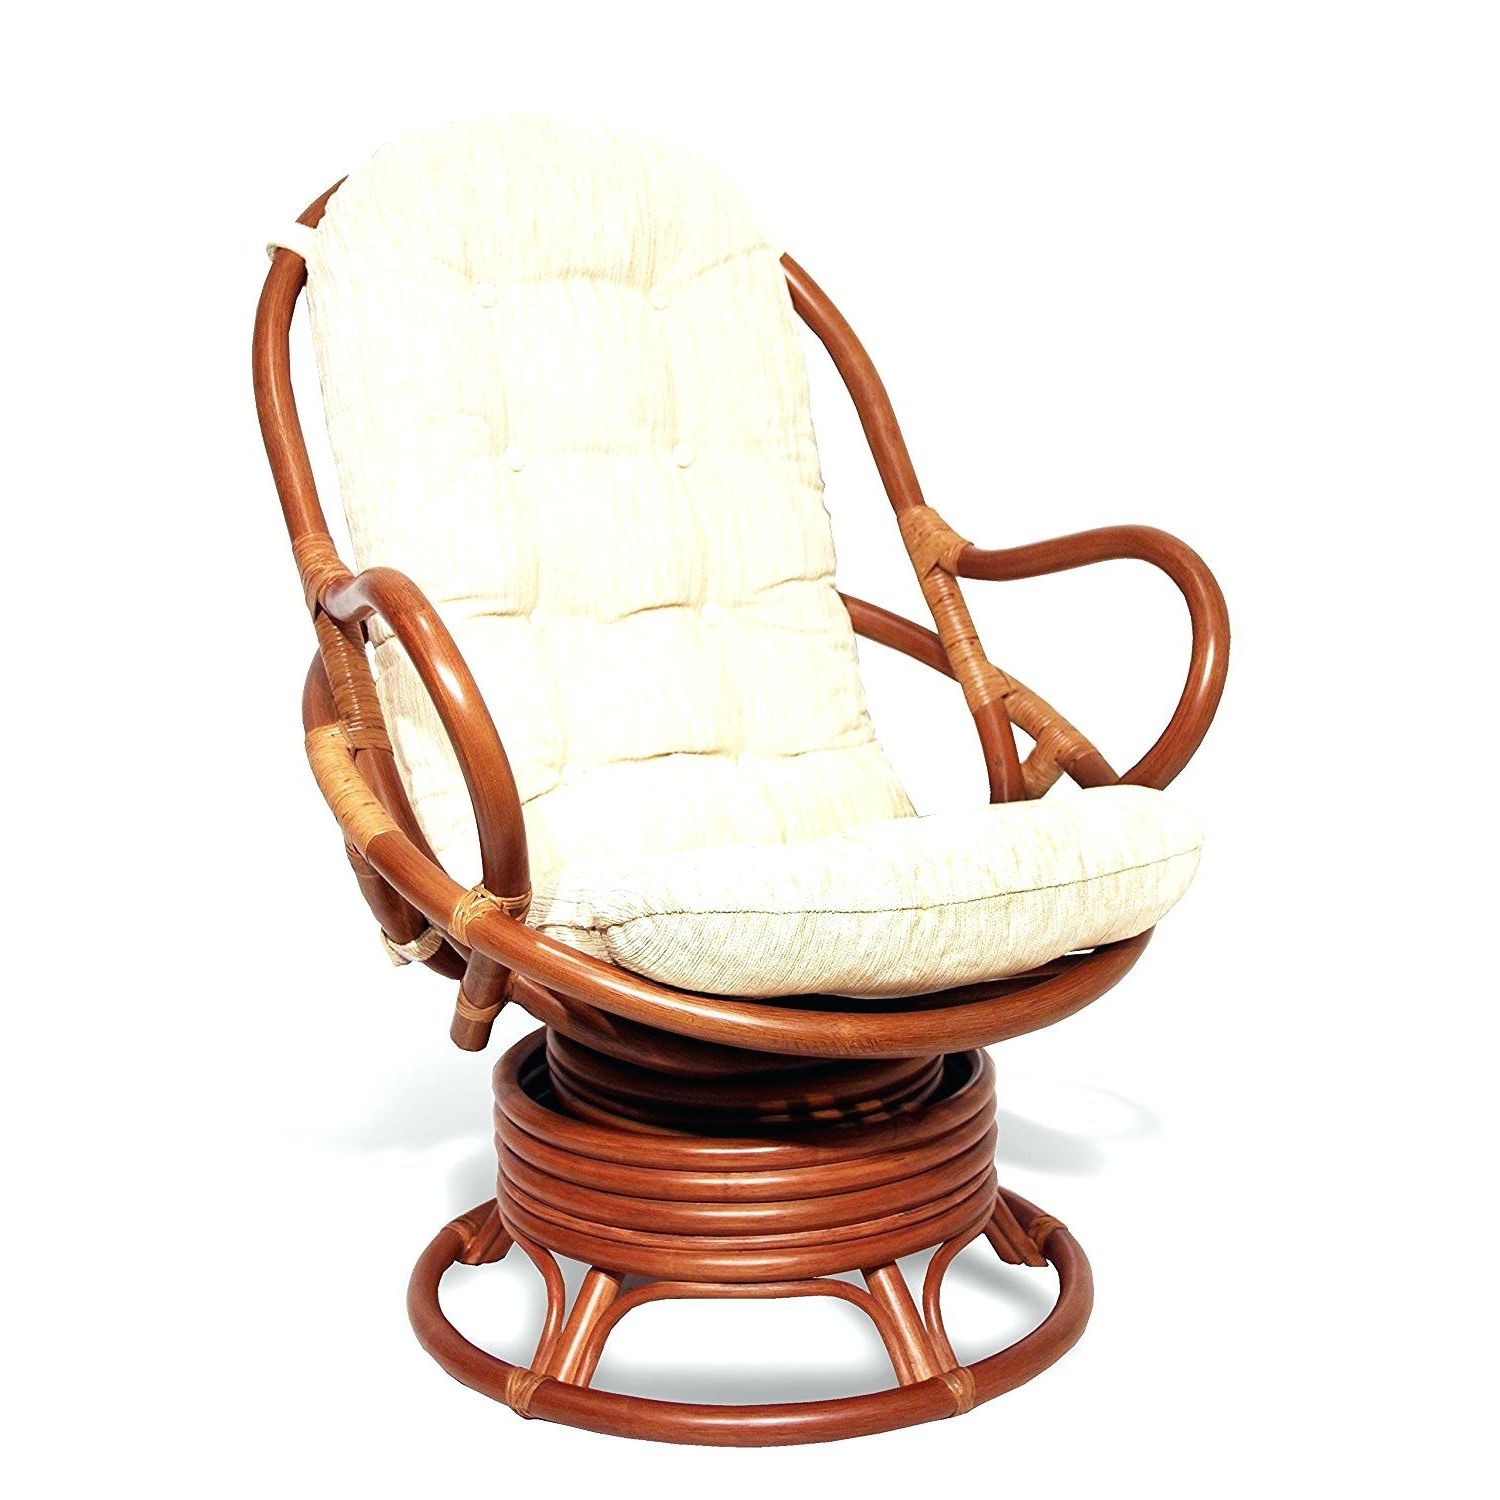 Cushion : Wicker Rocking Chair Followfirefish Com Cushions Cushion Intended For Favorite Wicker Rocking Chairs With Cushions (View 1 of 15)